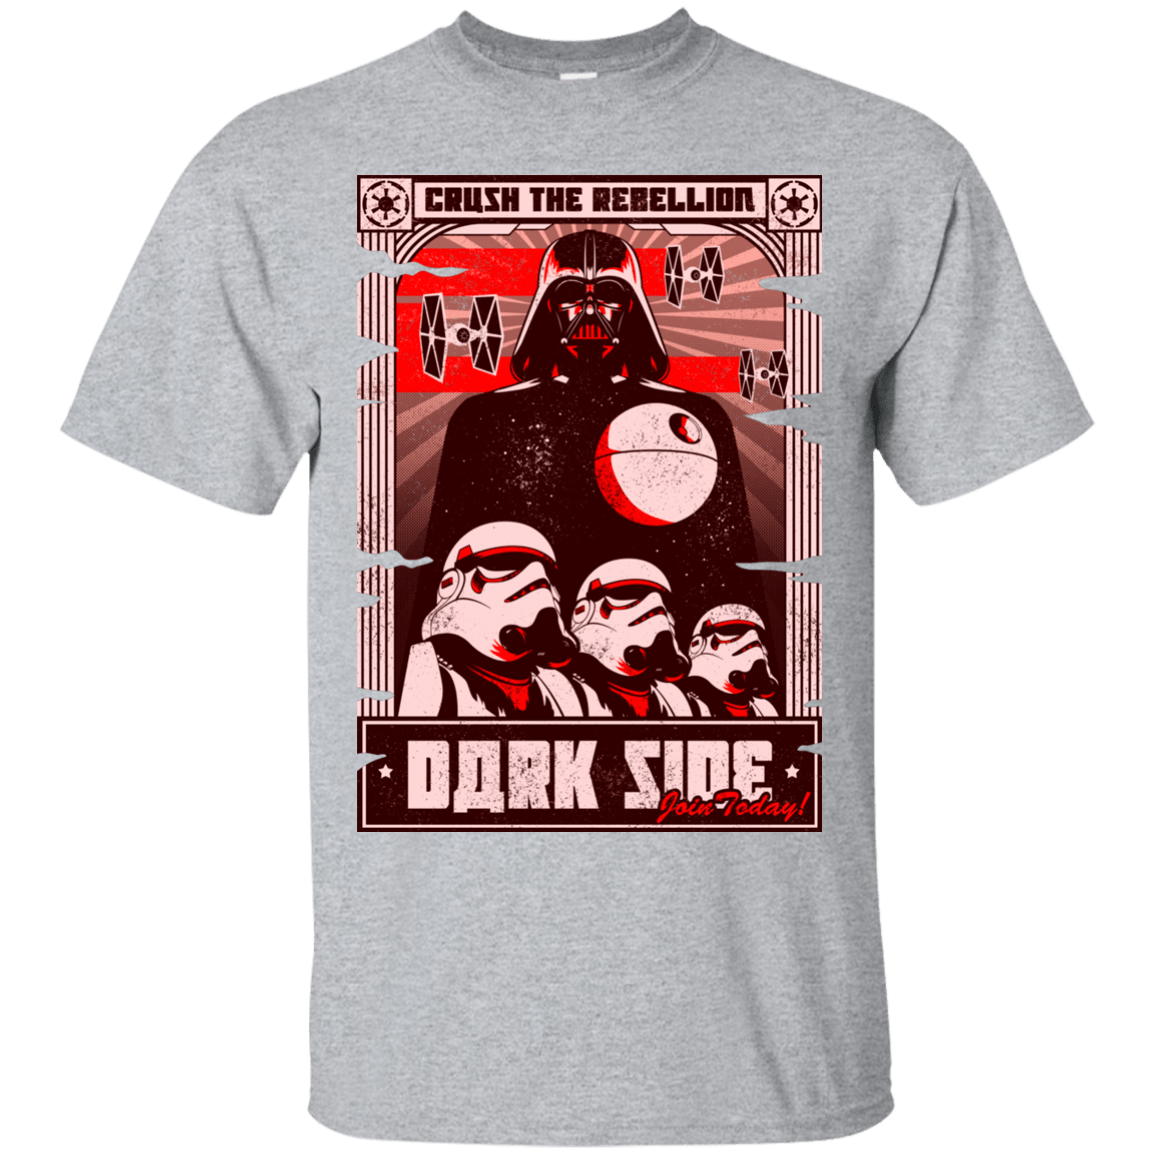 T-Shirts Sport Grey / Small Join the Dark SIde T-Shirt